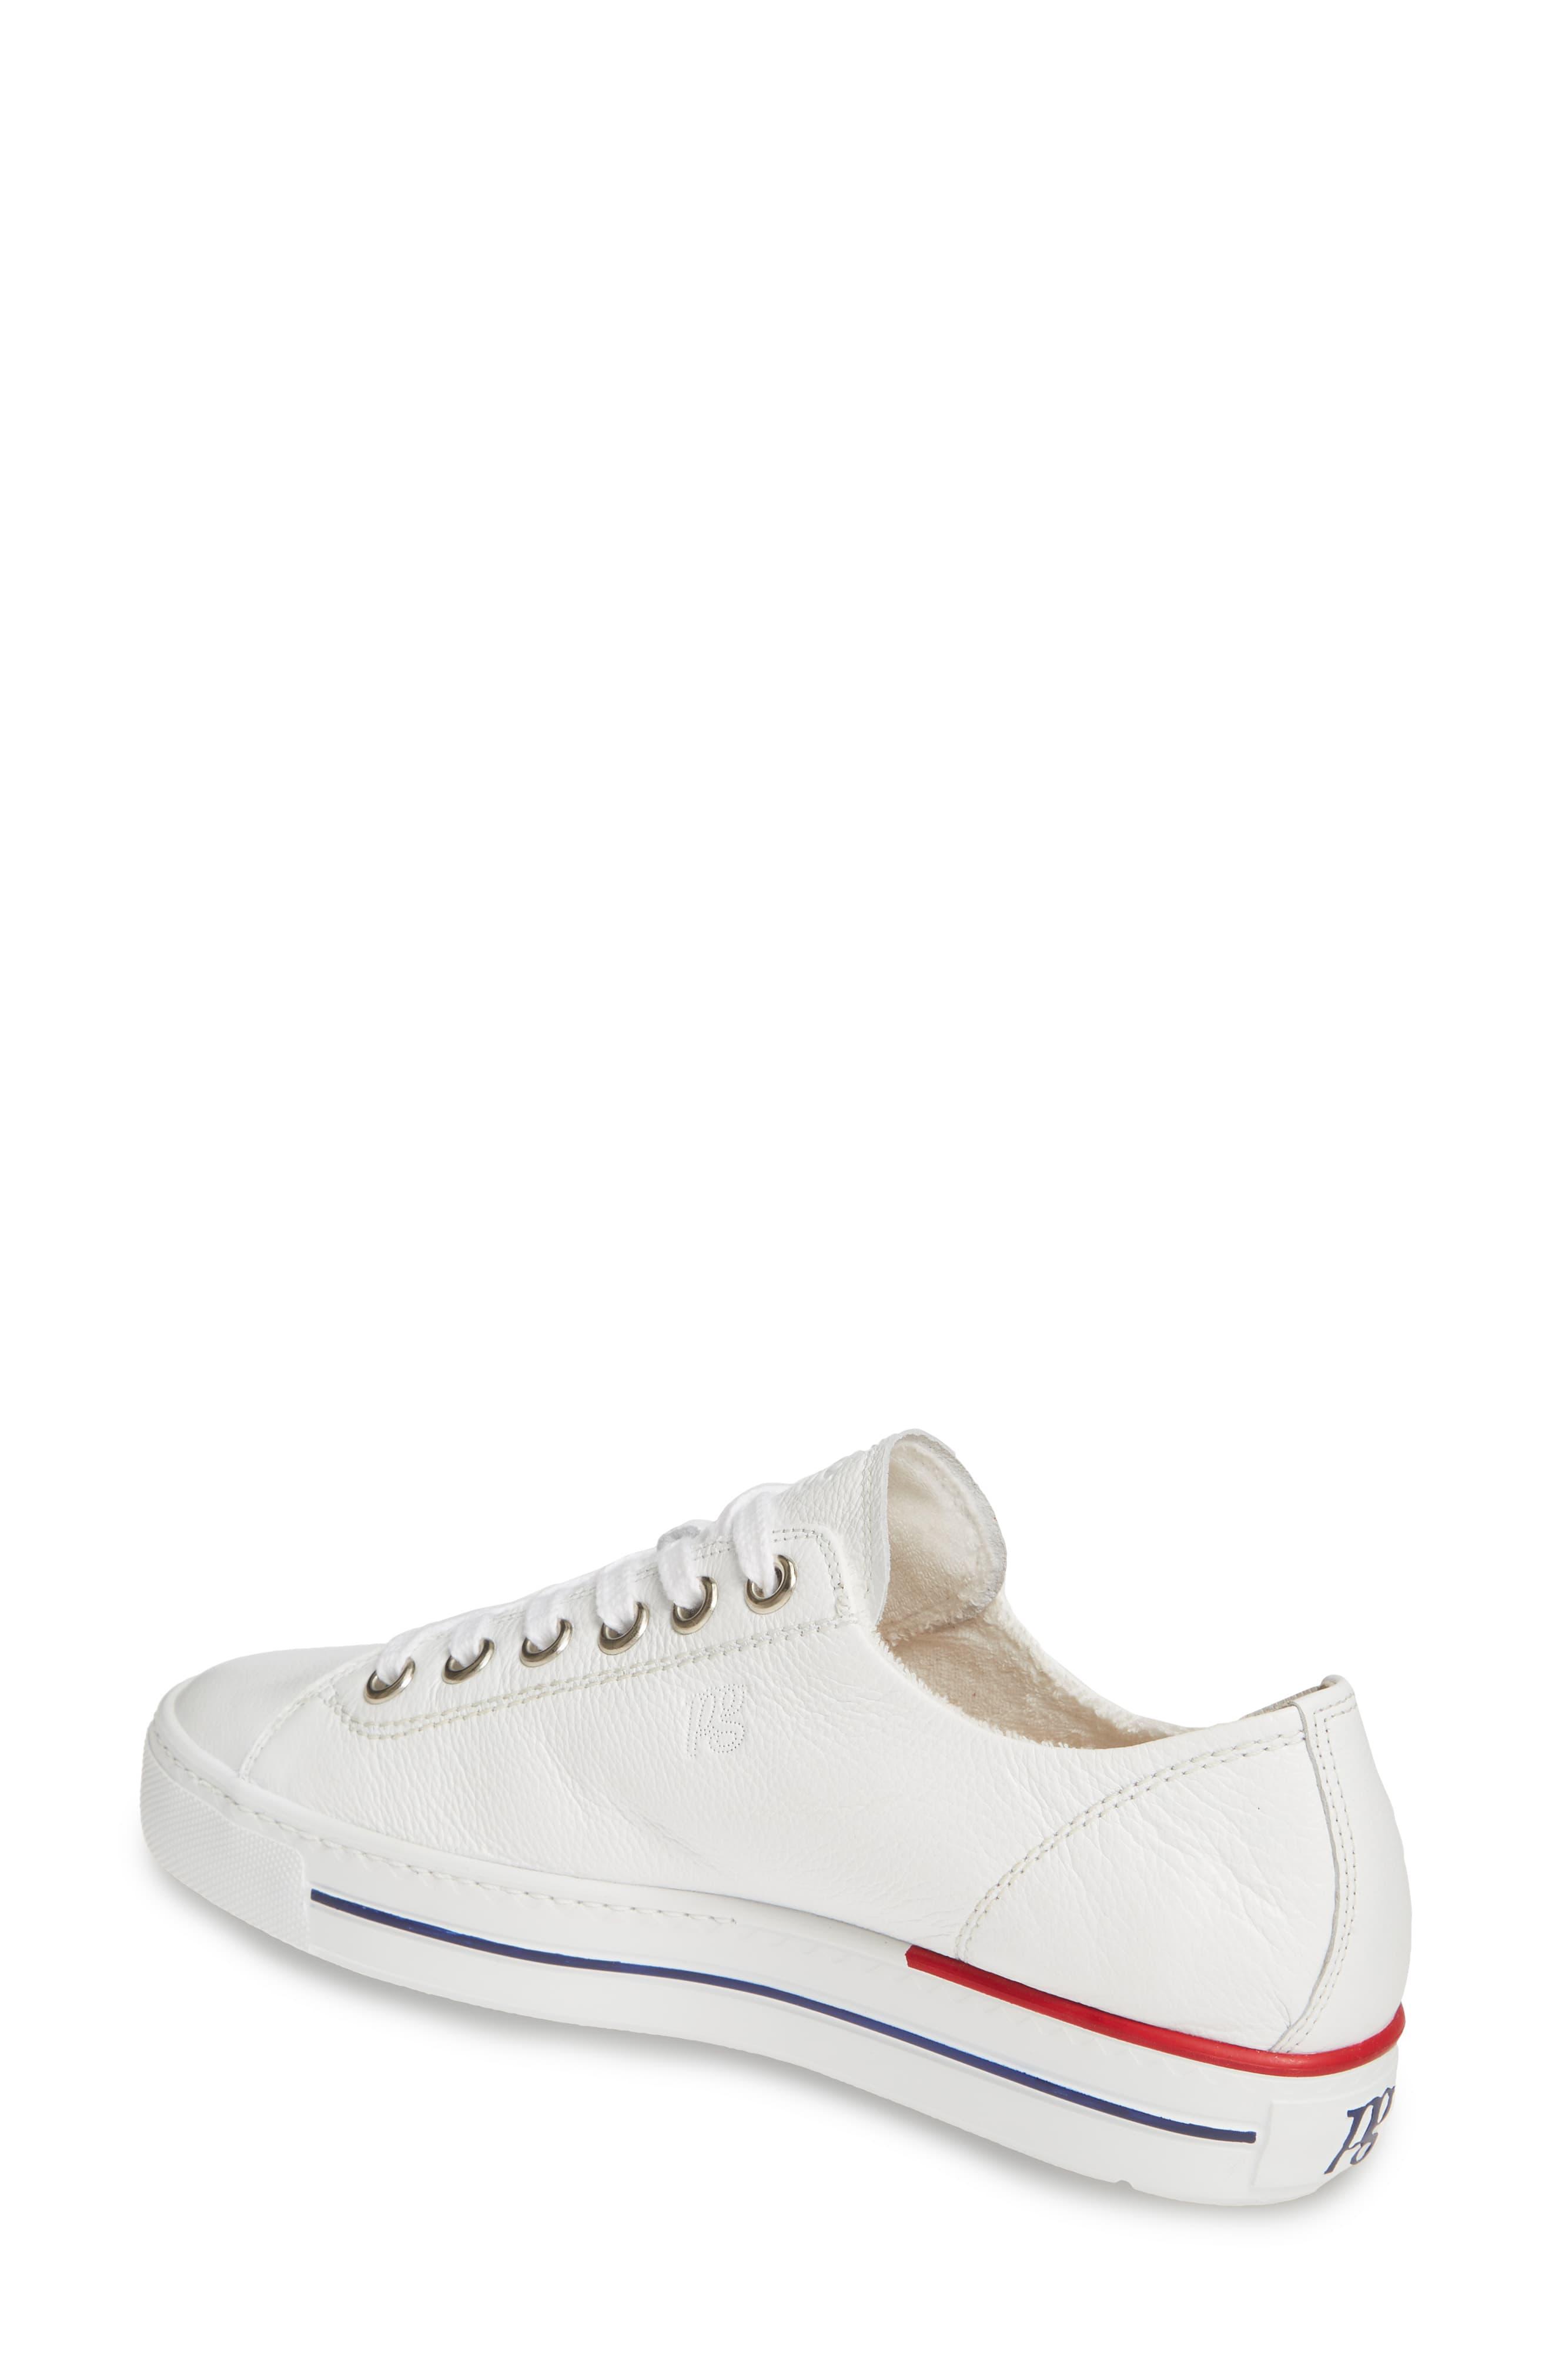 Paul Green Lace Carly Low Top Sneaker in White Leather (White) - Lyst